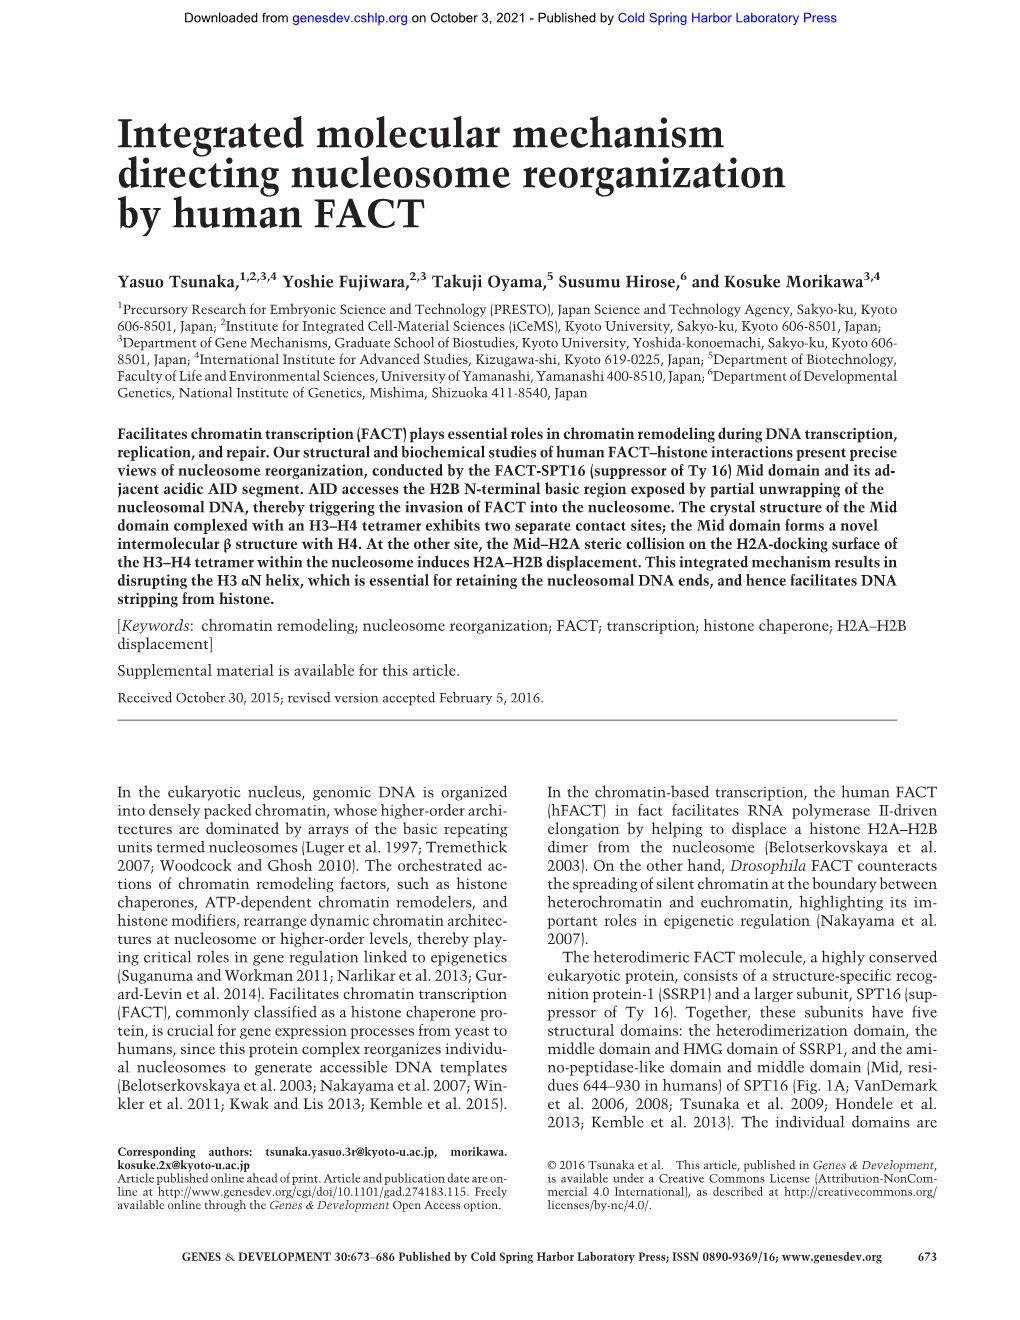 Integrated Molecular Mechanism Directing Nucleosome Reorganization by Human FACT